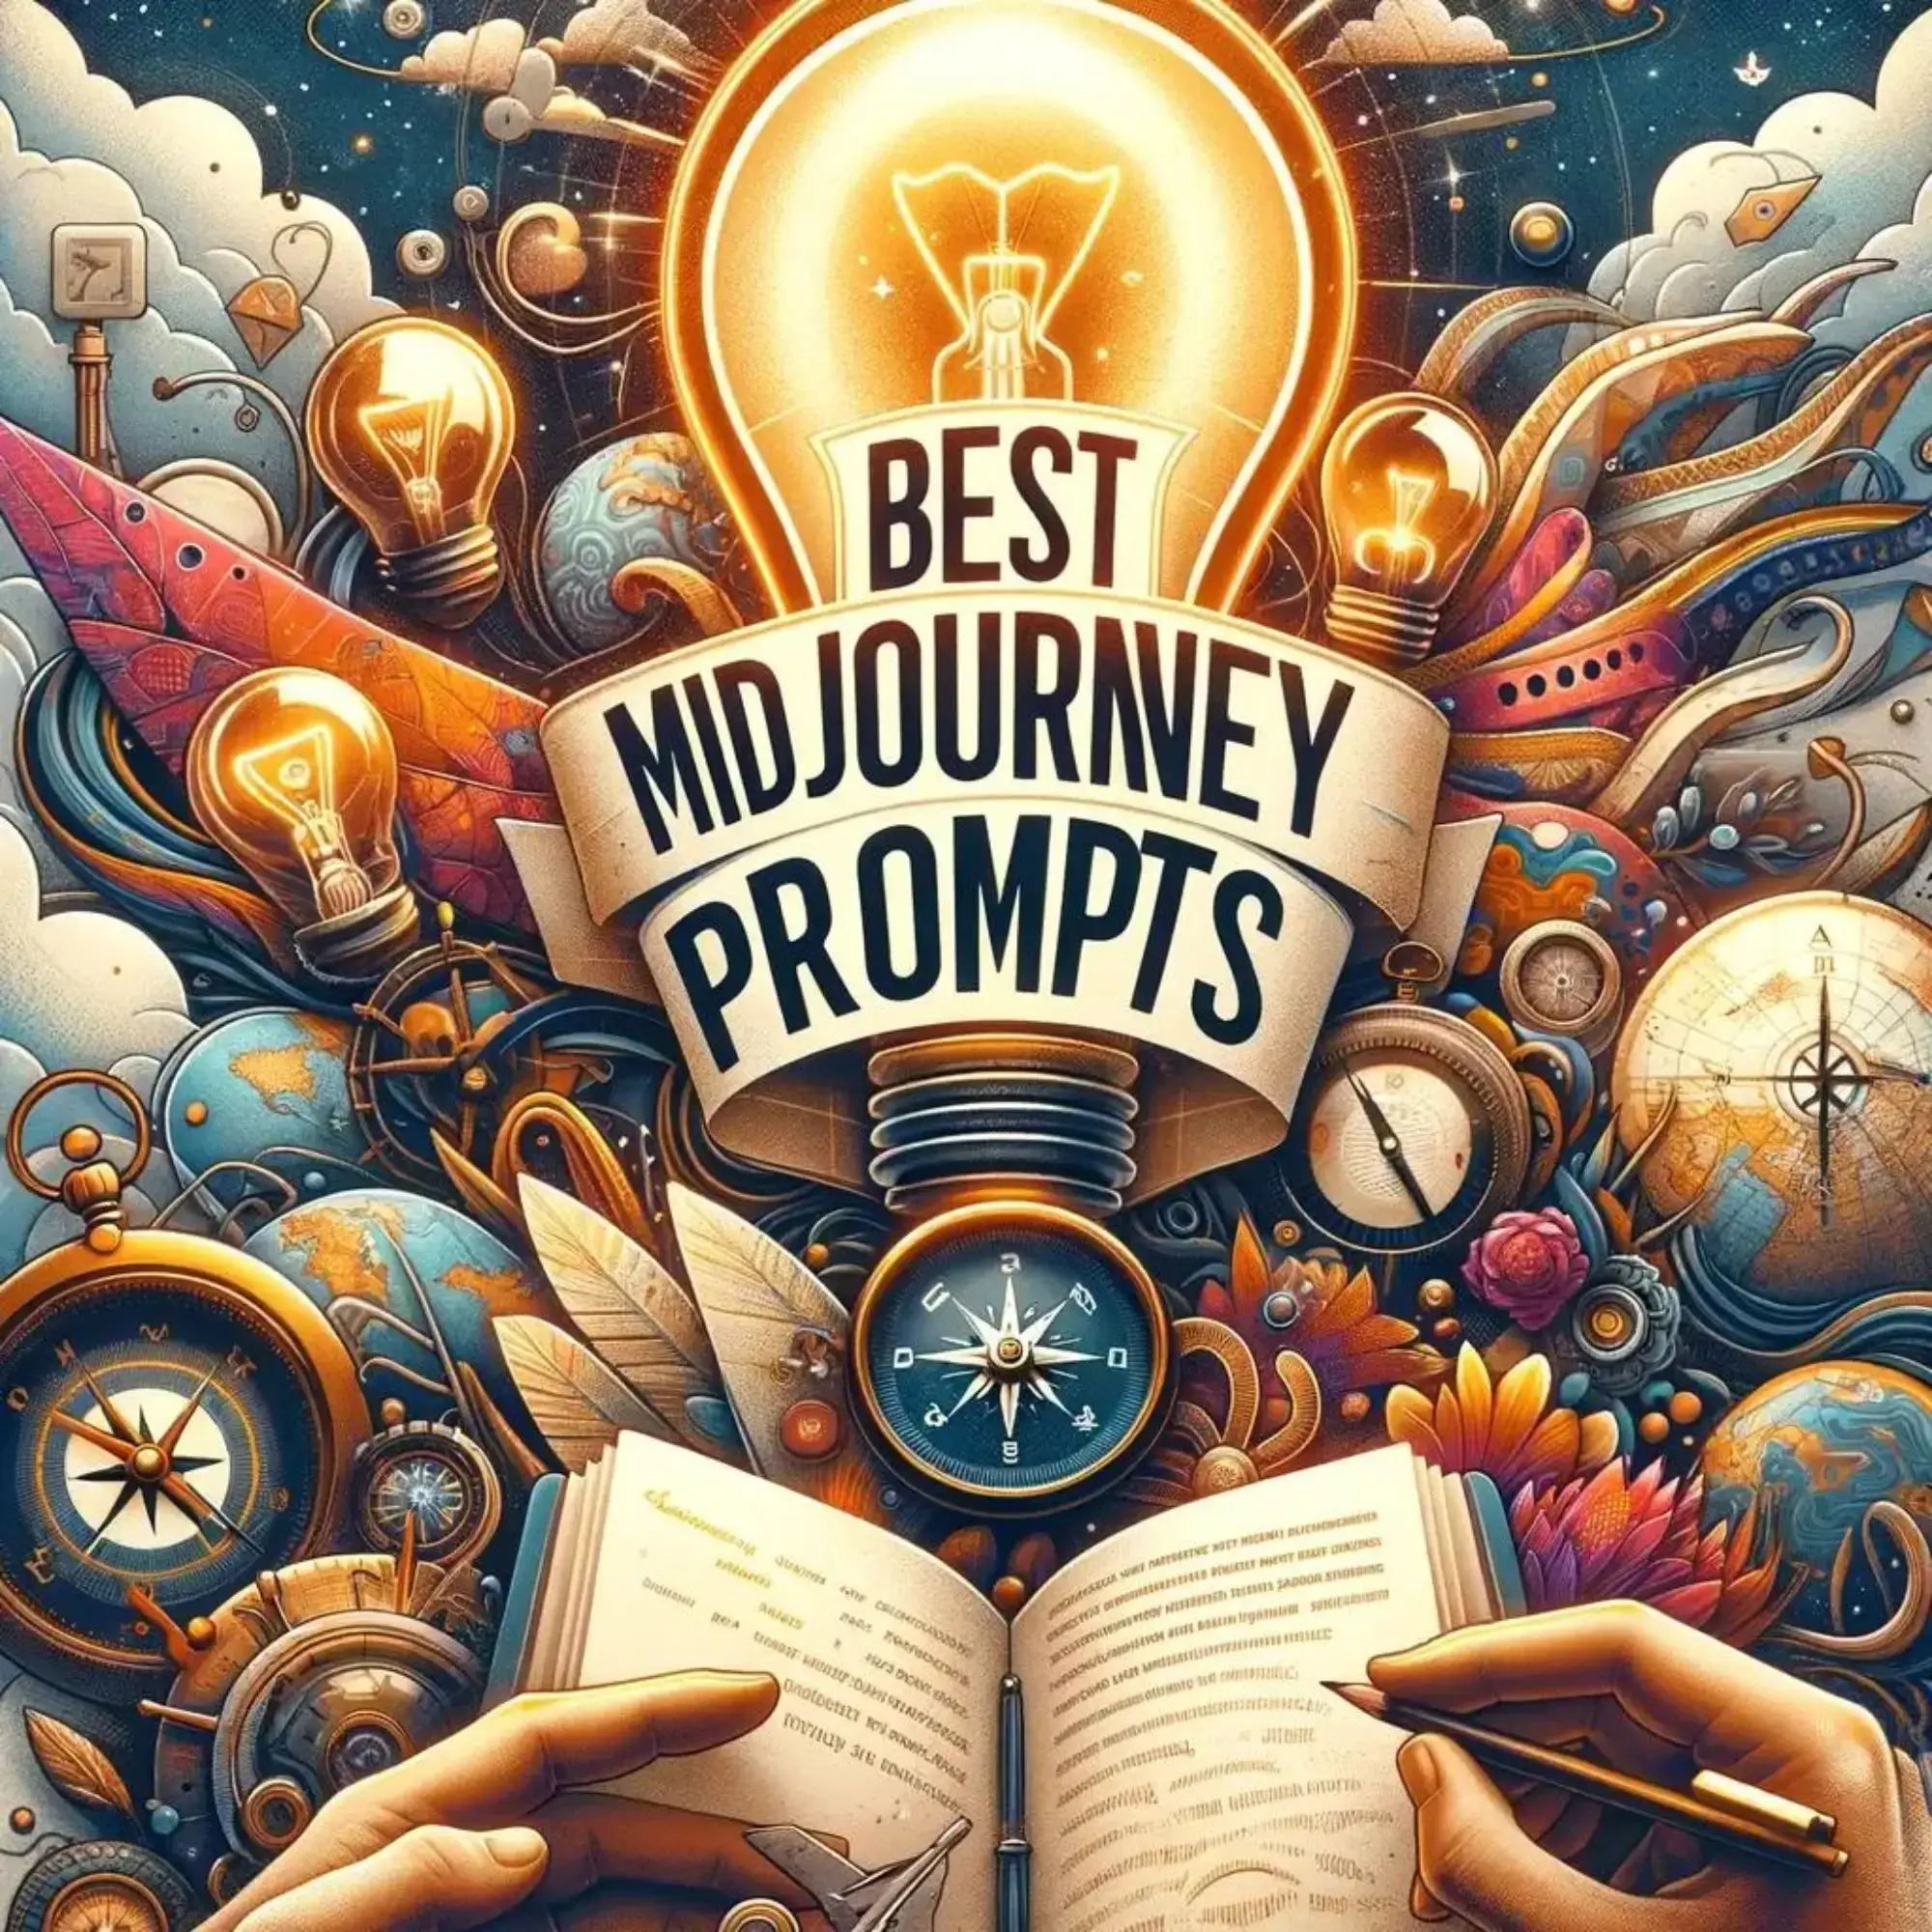 Vibrant illustration featuring a central light bulb with the text 'Best Midjourney Prompts', surrounded by various whimsical elements like gears, compasses, books, and celestial bodies.